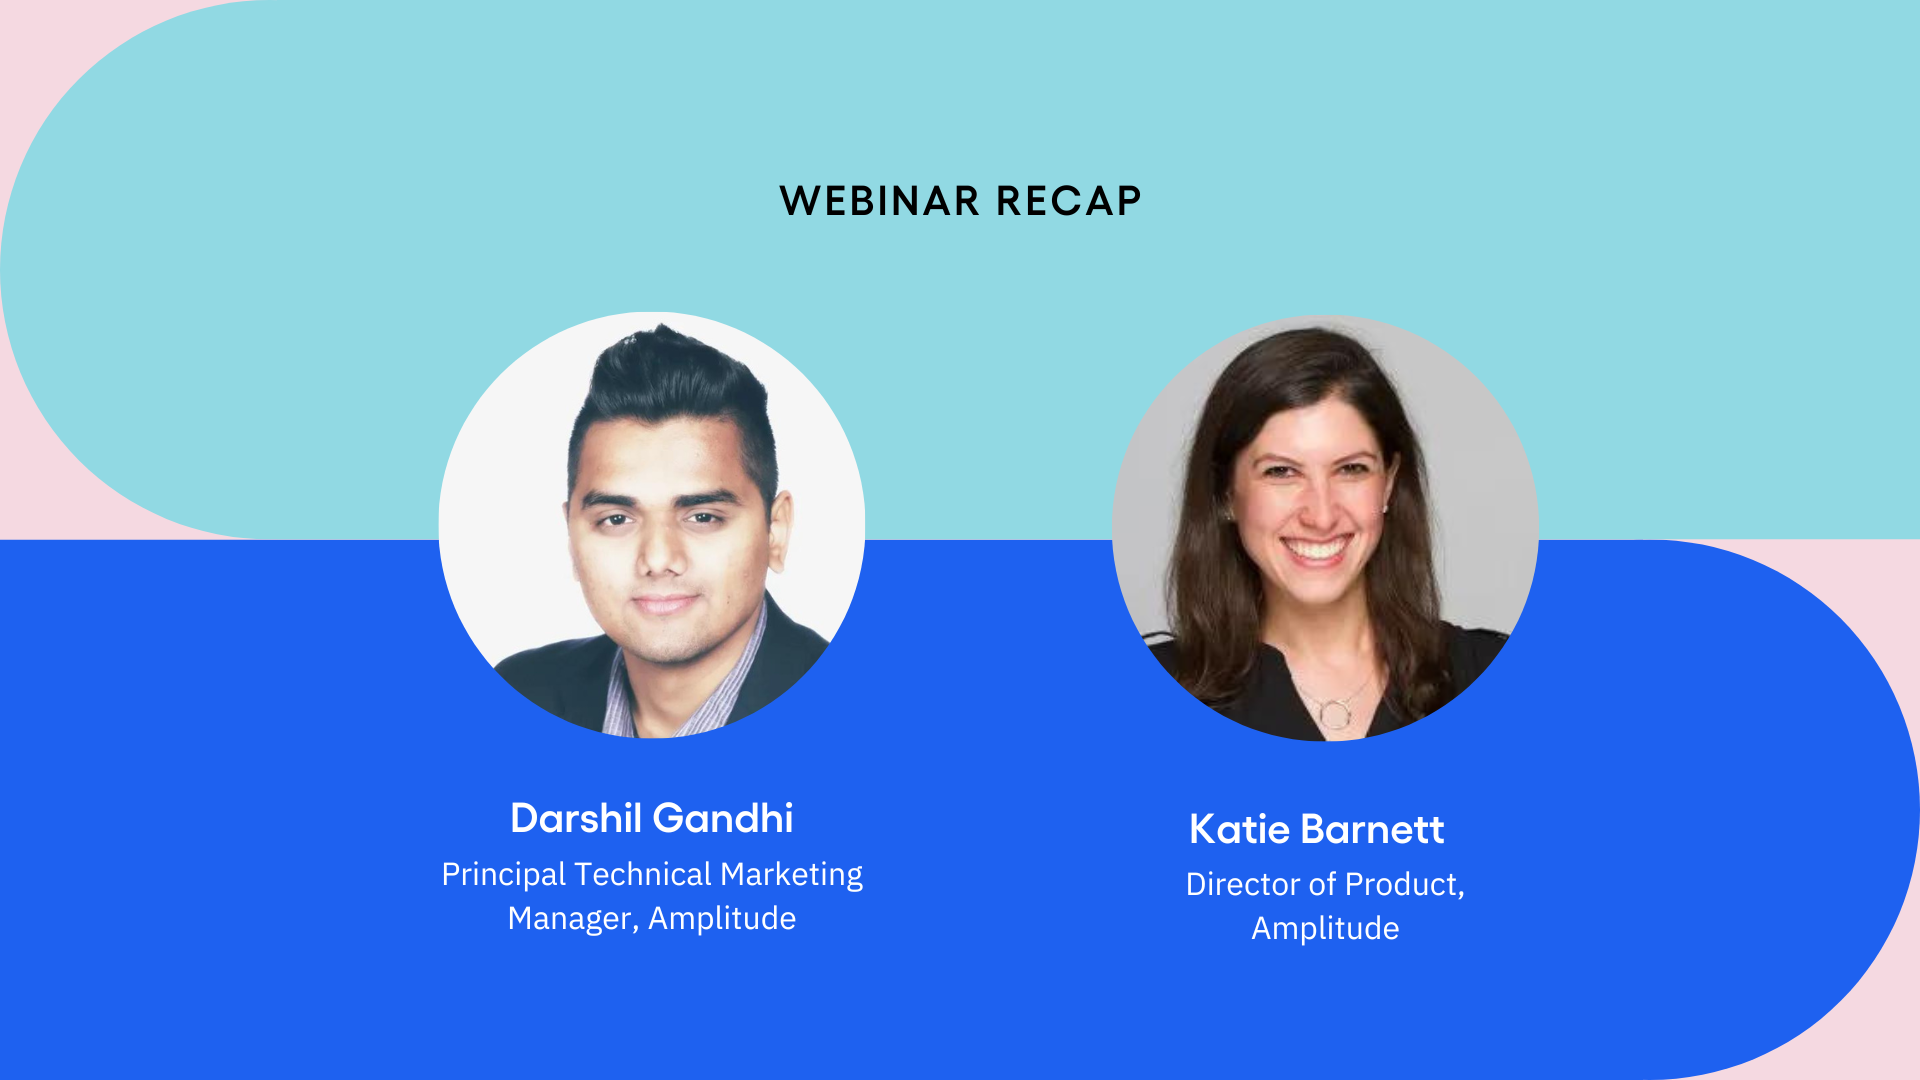 Webinar recap featuring Darshil and Katie from Amplitude